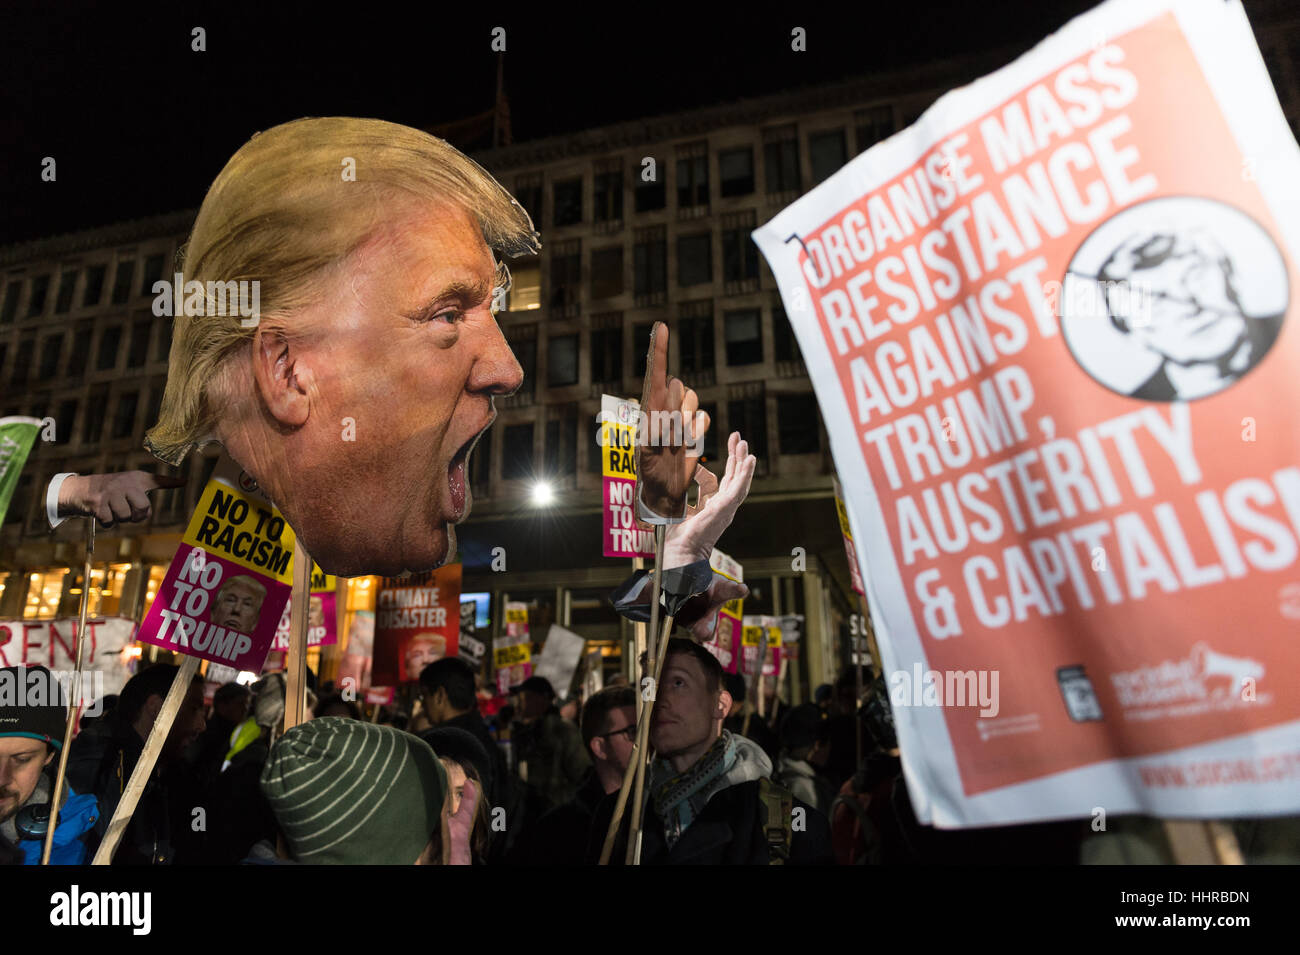 London, UK. 20th January 2017. Hundreds of people gather outside the American embassy in Grosvenor Square to protest against Donald Trump on the day of his inauguration as the 45th President of the United States. The participants demonstrated over Trump's political rhetoric emphasized during the election campaign and his views on issues such as human rights, climate change, racism, immigration and nuclear arms. Credit: Wiktor Szymanowicz/Alamy Live News Stock Photo